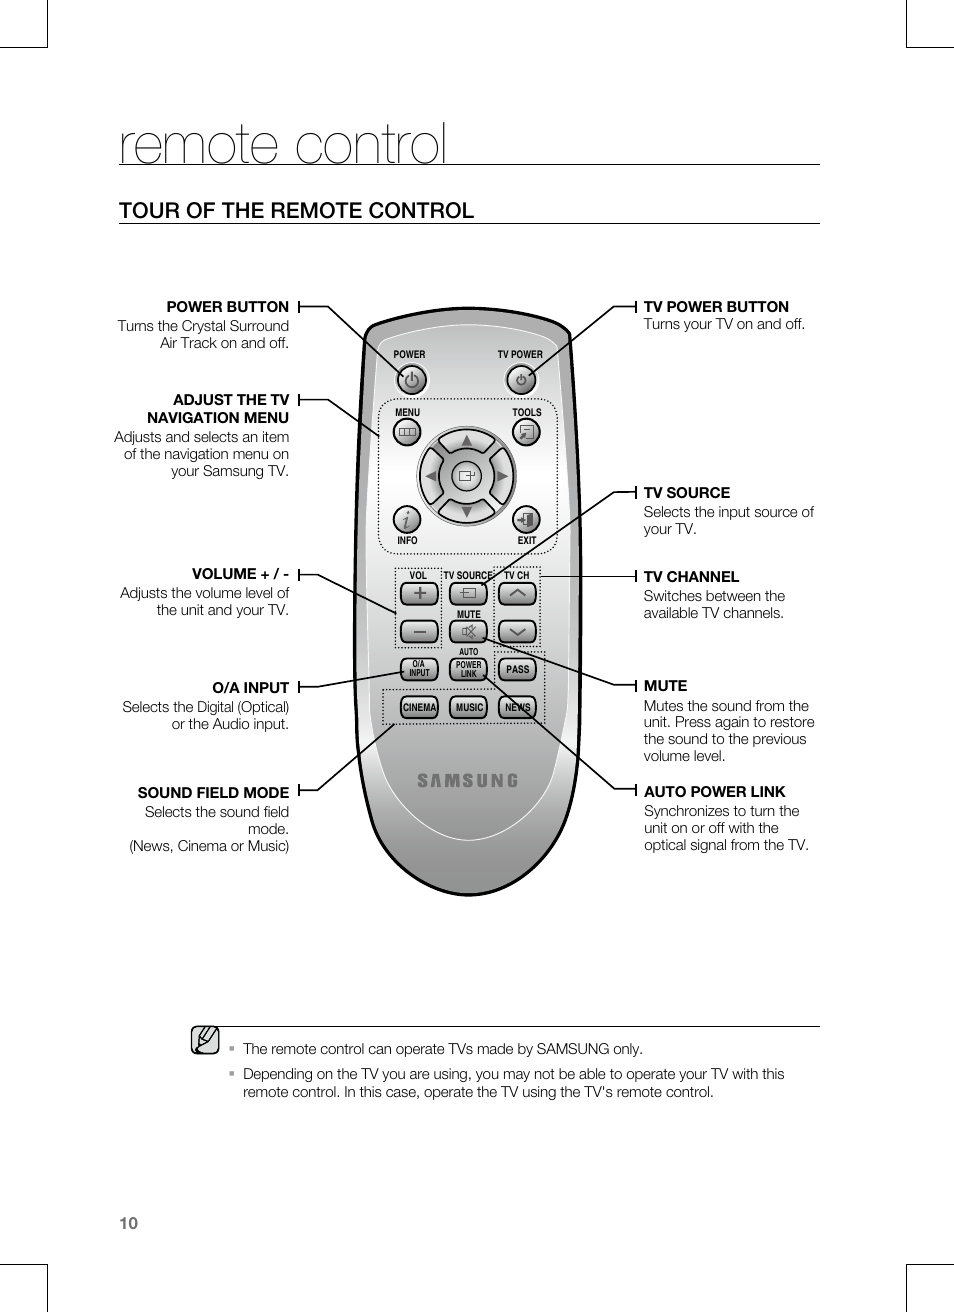 Remote control, Tour of the remote control | Samsung CRYSTAL SURROUND AIR TRACK HT-SB1G User Manual | Page 10 / 21